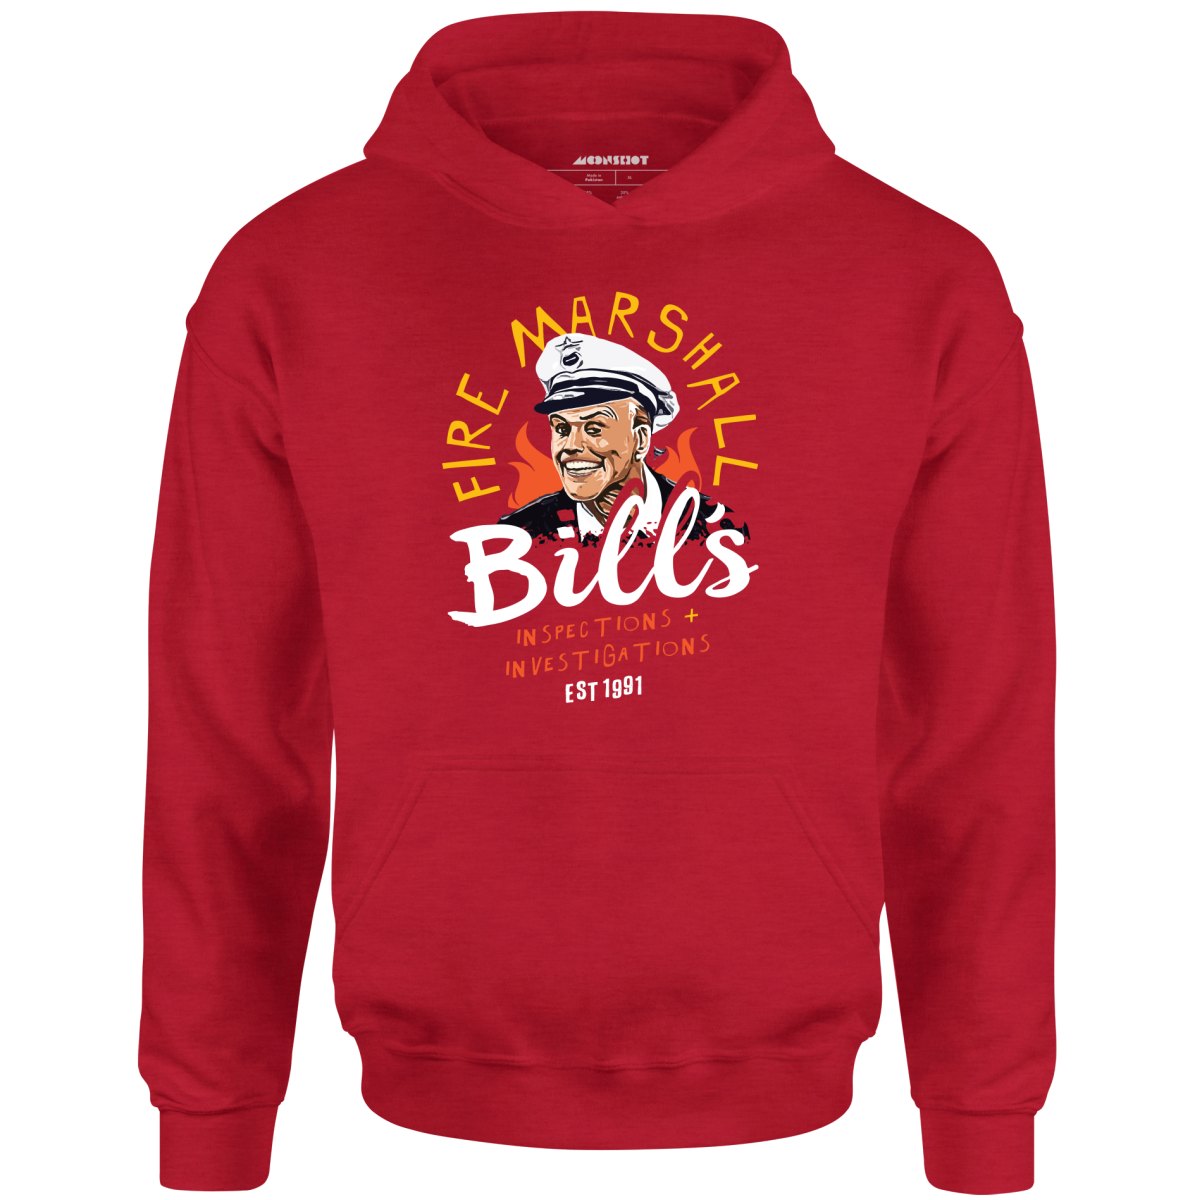 Fire Marshall Bill's Inspections & Investigations - Unisex Hoodie